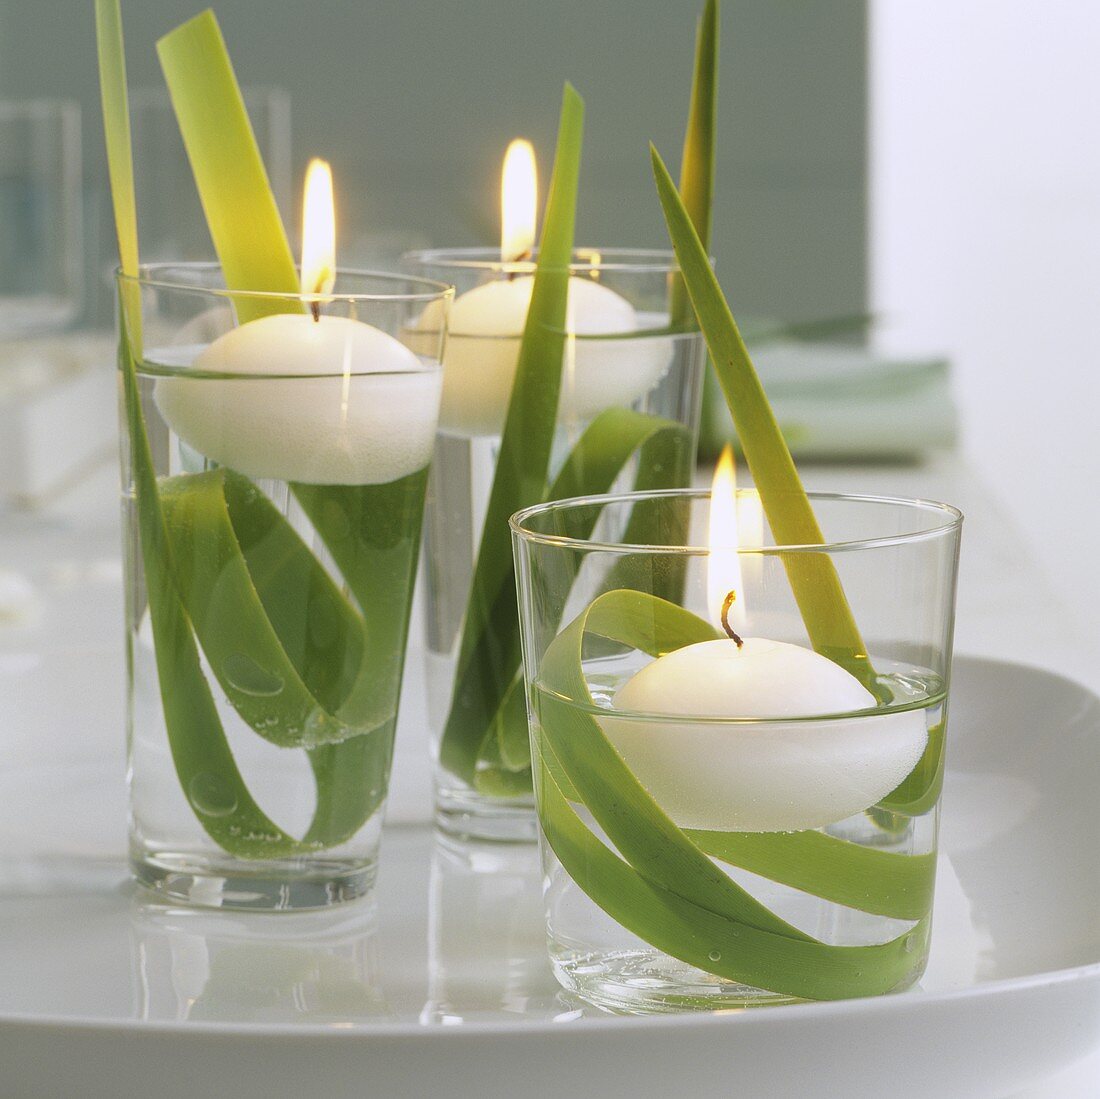 Spring decoration: three floating candles in glasses of water